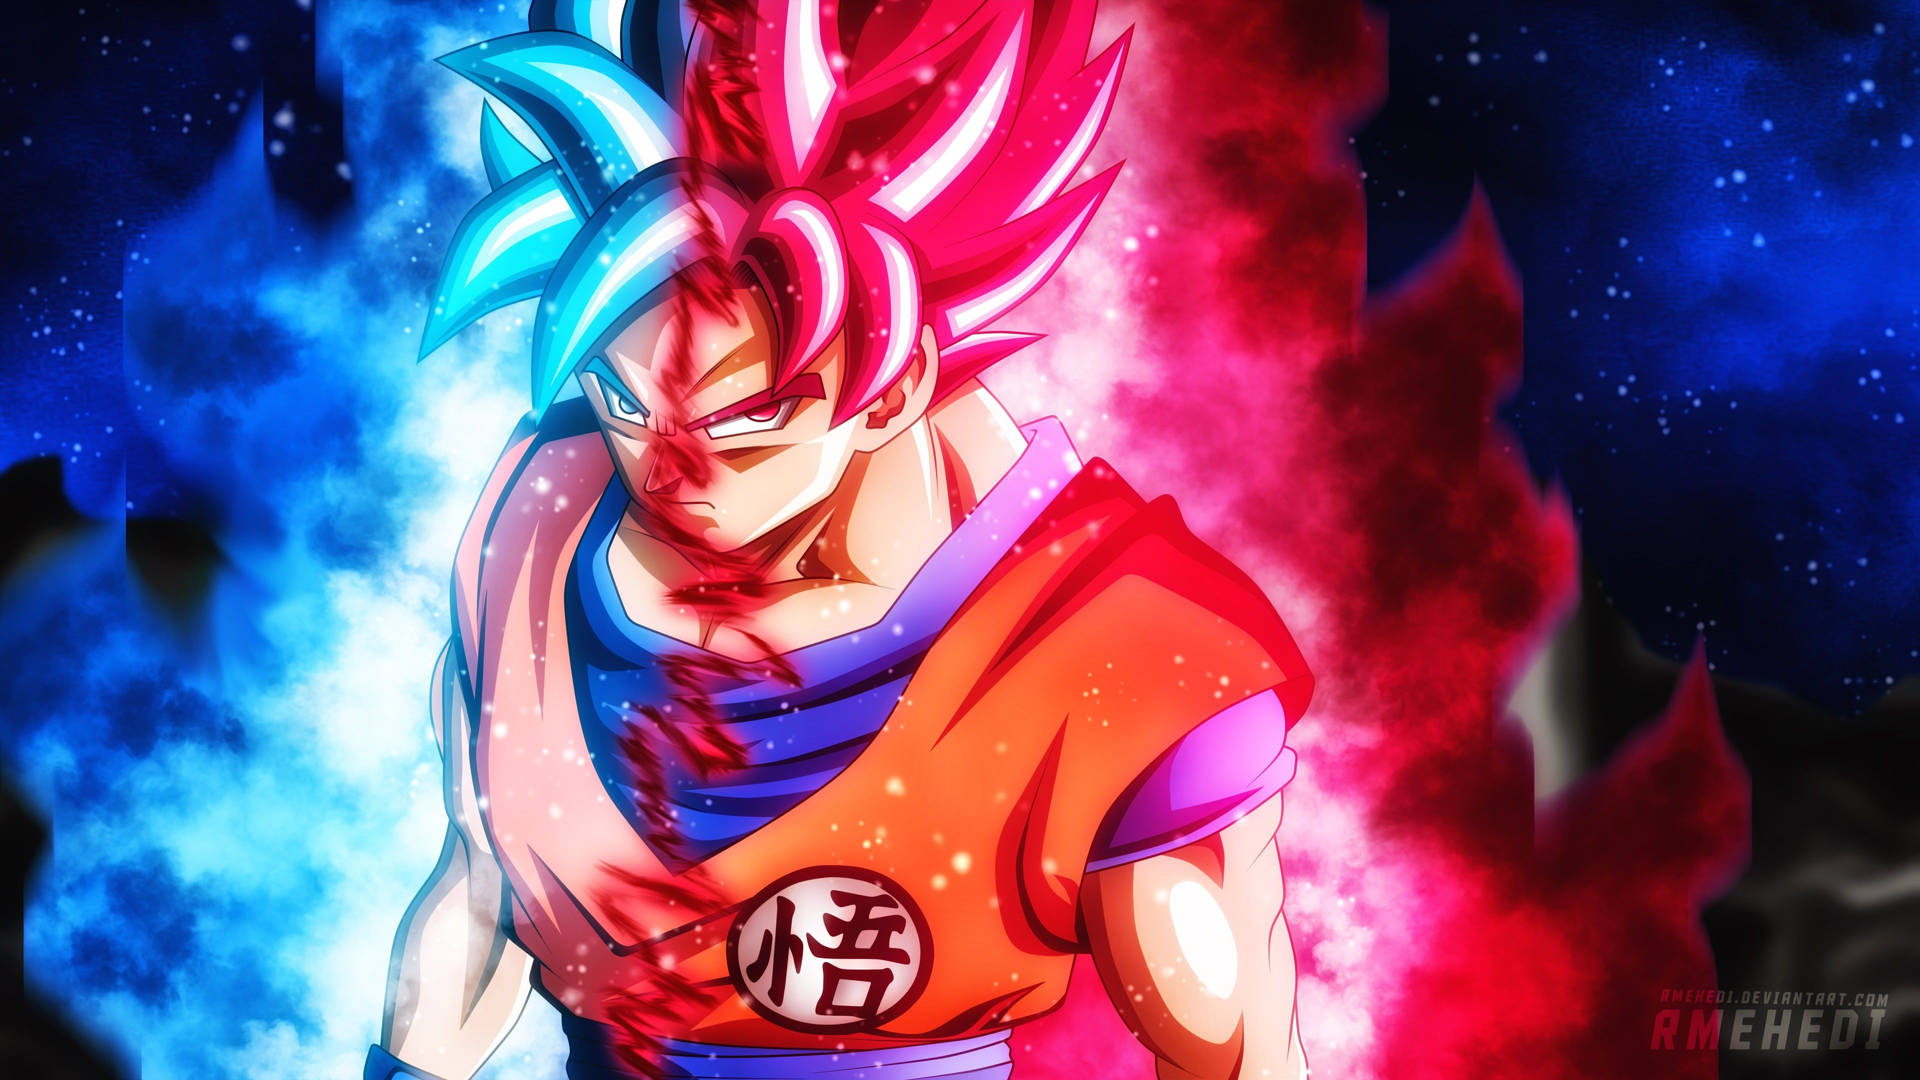 "Goku Unleashes His Limitless Power in Dragon Ball Super" Wallpaper